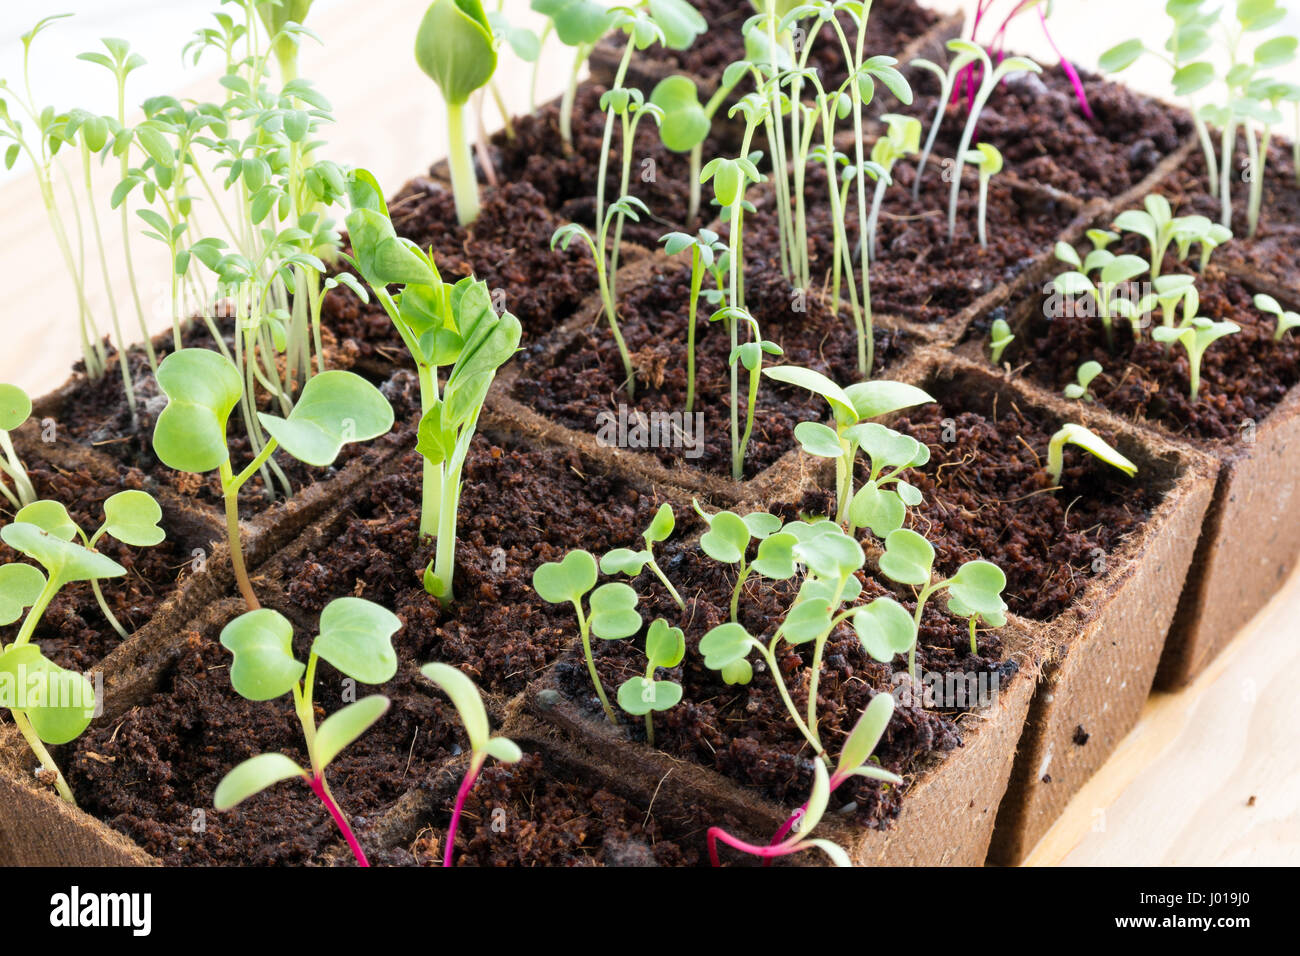 Rows of young fresh seedlings of various herbs and vegetables in peat pots Stock Photo